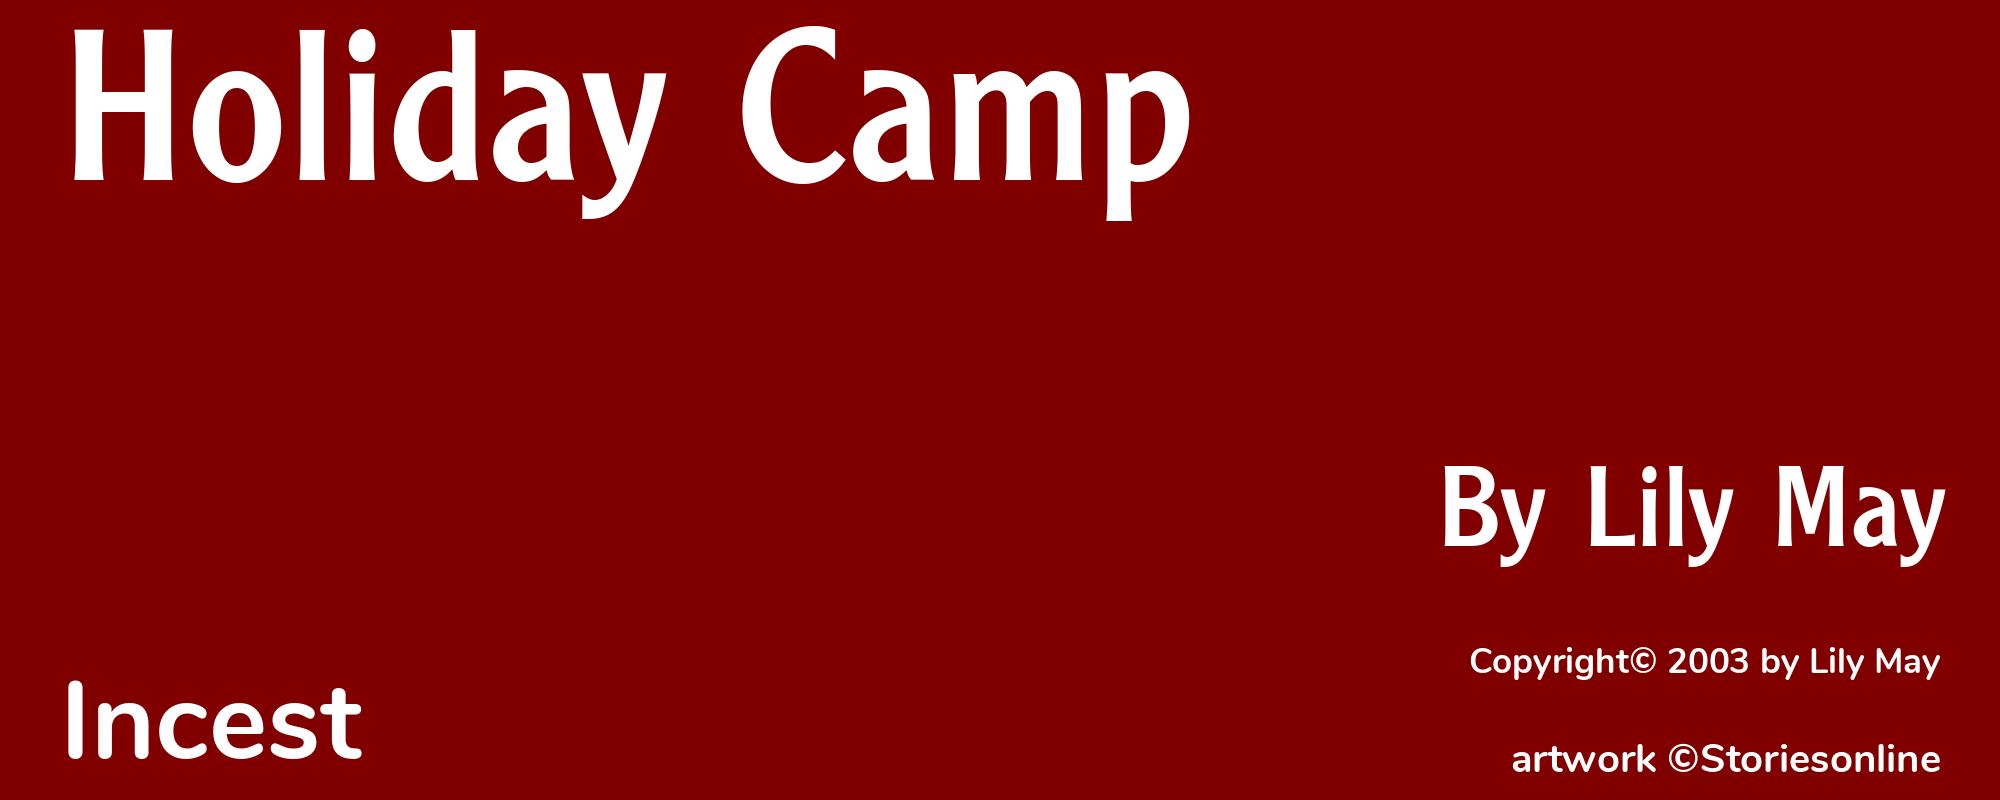 Holiday Camp - Cover